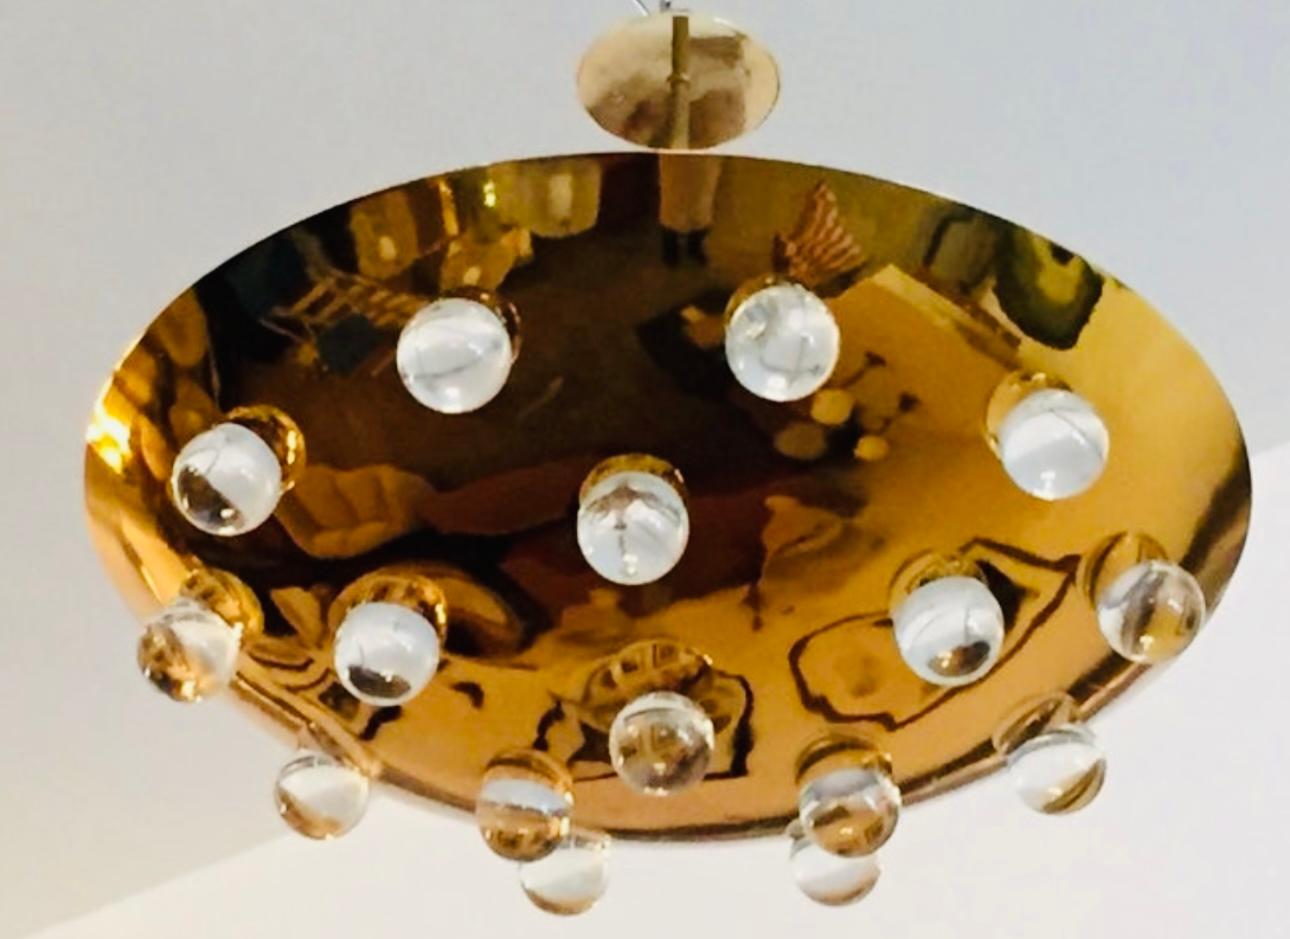 A stunning 1960s French polished solid brass round disc fixture with 16 solid glass orbs. Five-light sources which emit light downward through the glass as well as up toward the ceiling. The ceiling pole can be lengthened or shortened. Rewired and